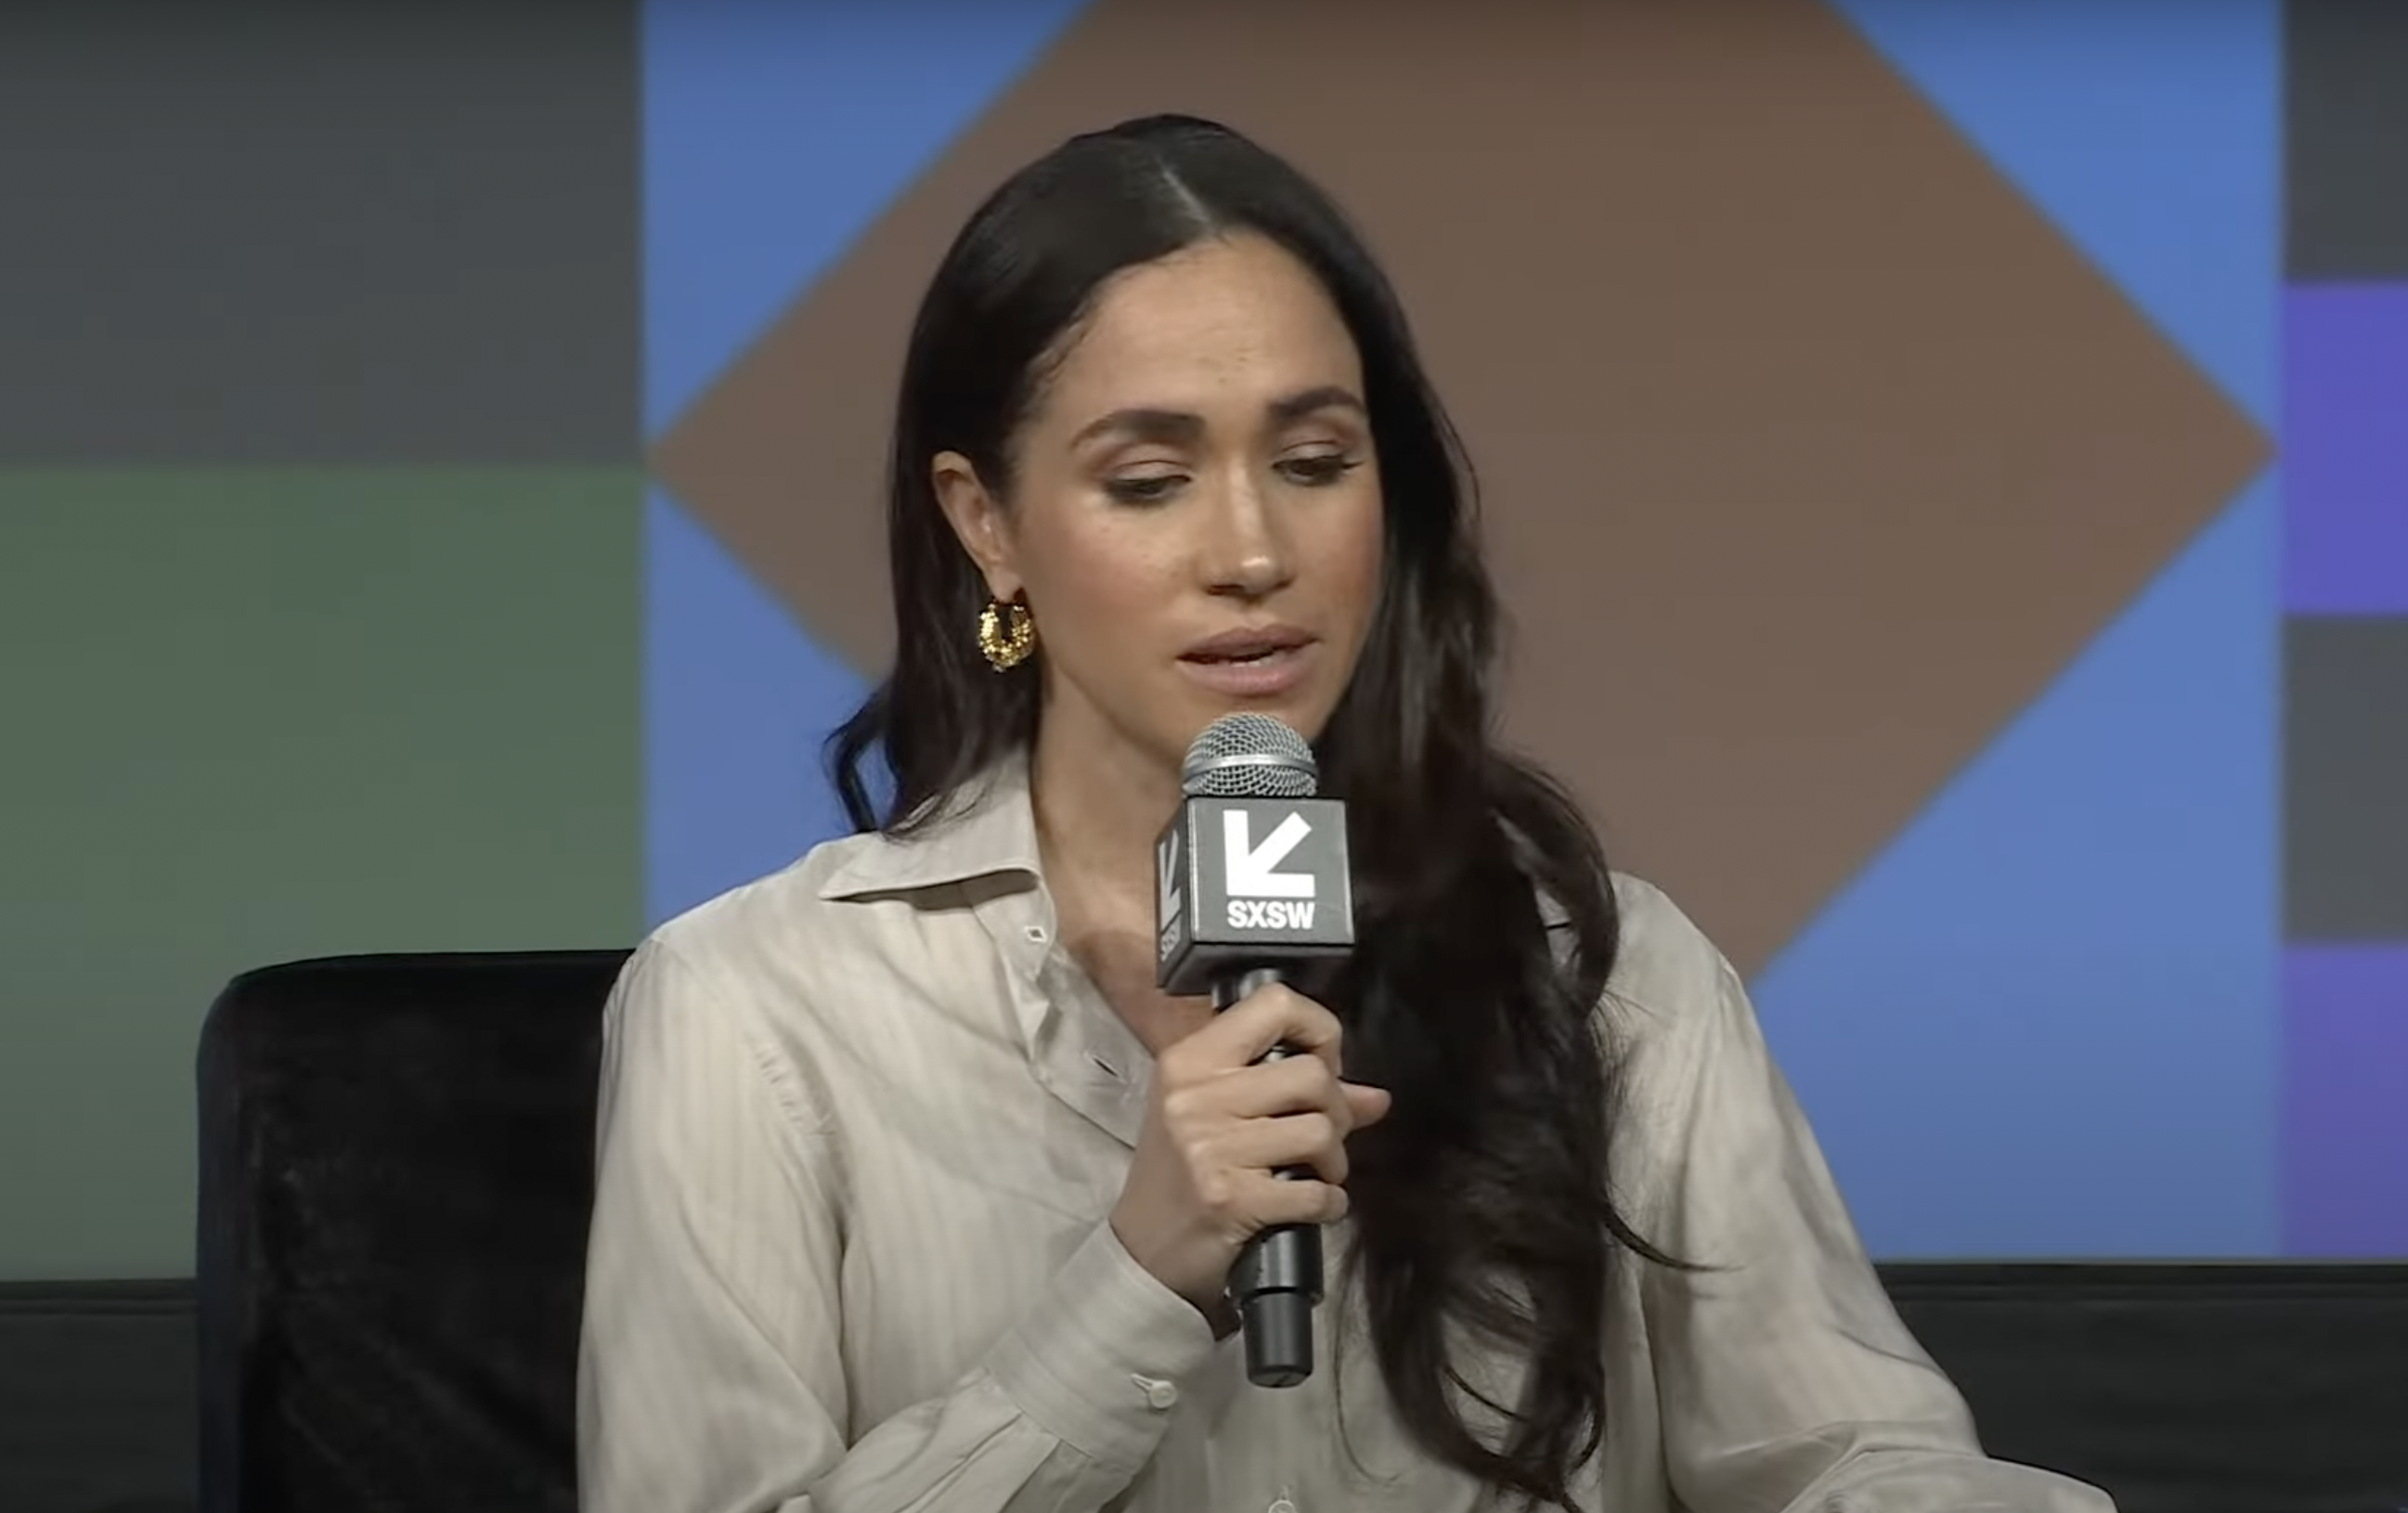 Meghan Markle bei der Veranstaltung "Breaking Barriers, Shaping Narratives: How Women Lead On and Off the Screen" während der 2024 SXSW Conference and Festival im Austin Convention Center am 8. März 2024 in Austin, Texas. | Quelle: Youtube/SXSW